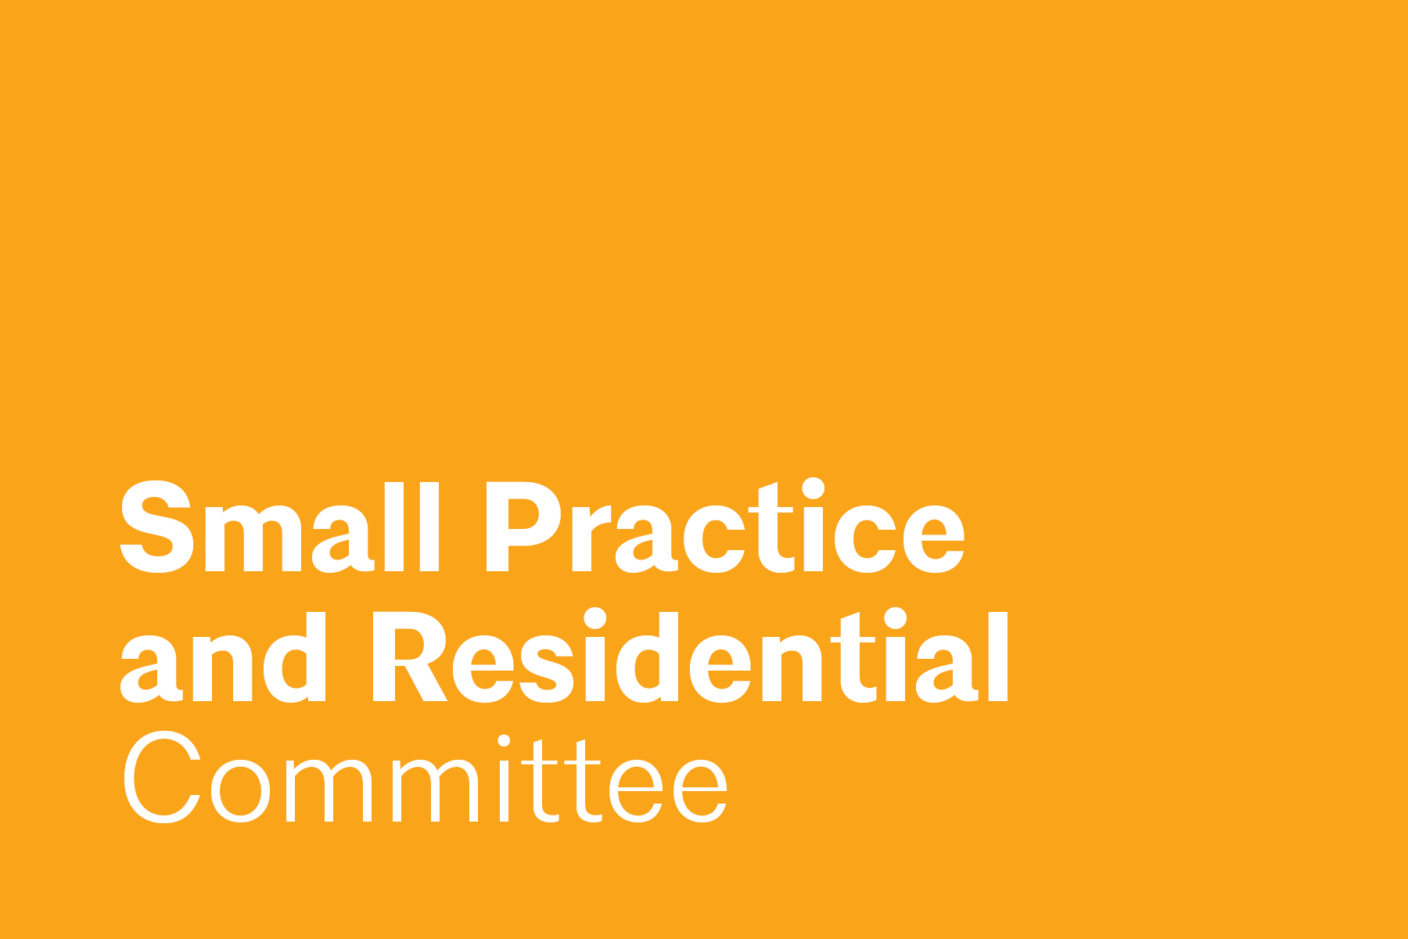 The Small Practice And Residential Committee (SPARC) supports professional & business development, leadership and growth for the many members of small practices and those practices engaged primarily in the execution of residential commissions. We represent this group of professionals within the AIA and the community – working to support professional development, elevate awareness of their work and to celebrate their contribution to the built environment.